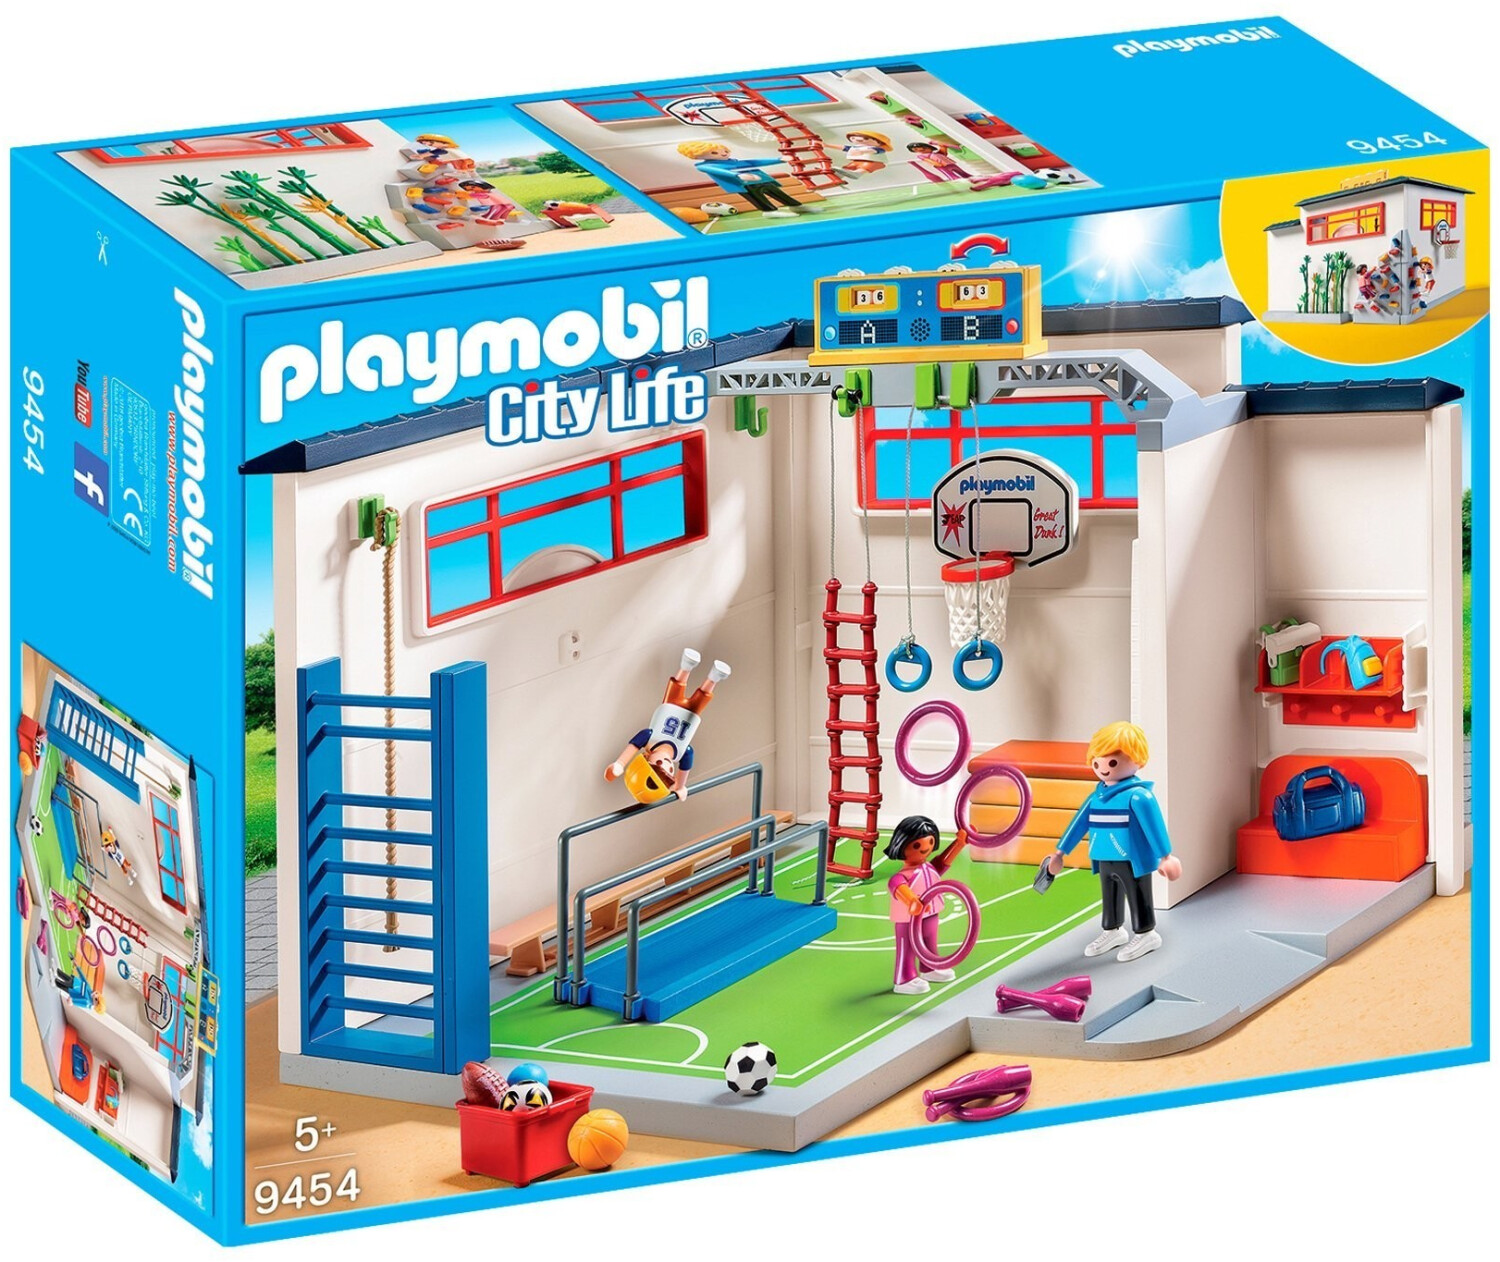 Playmobil Fille 4 Ans pas cher - Achat neuf et occasion